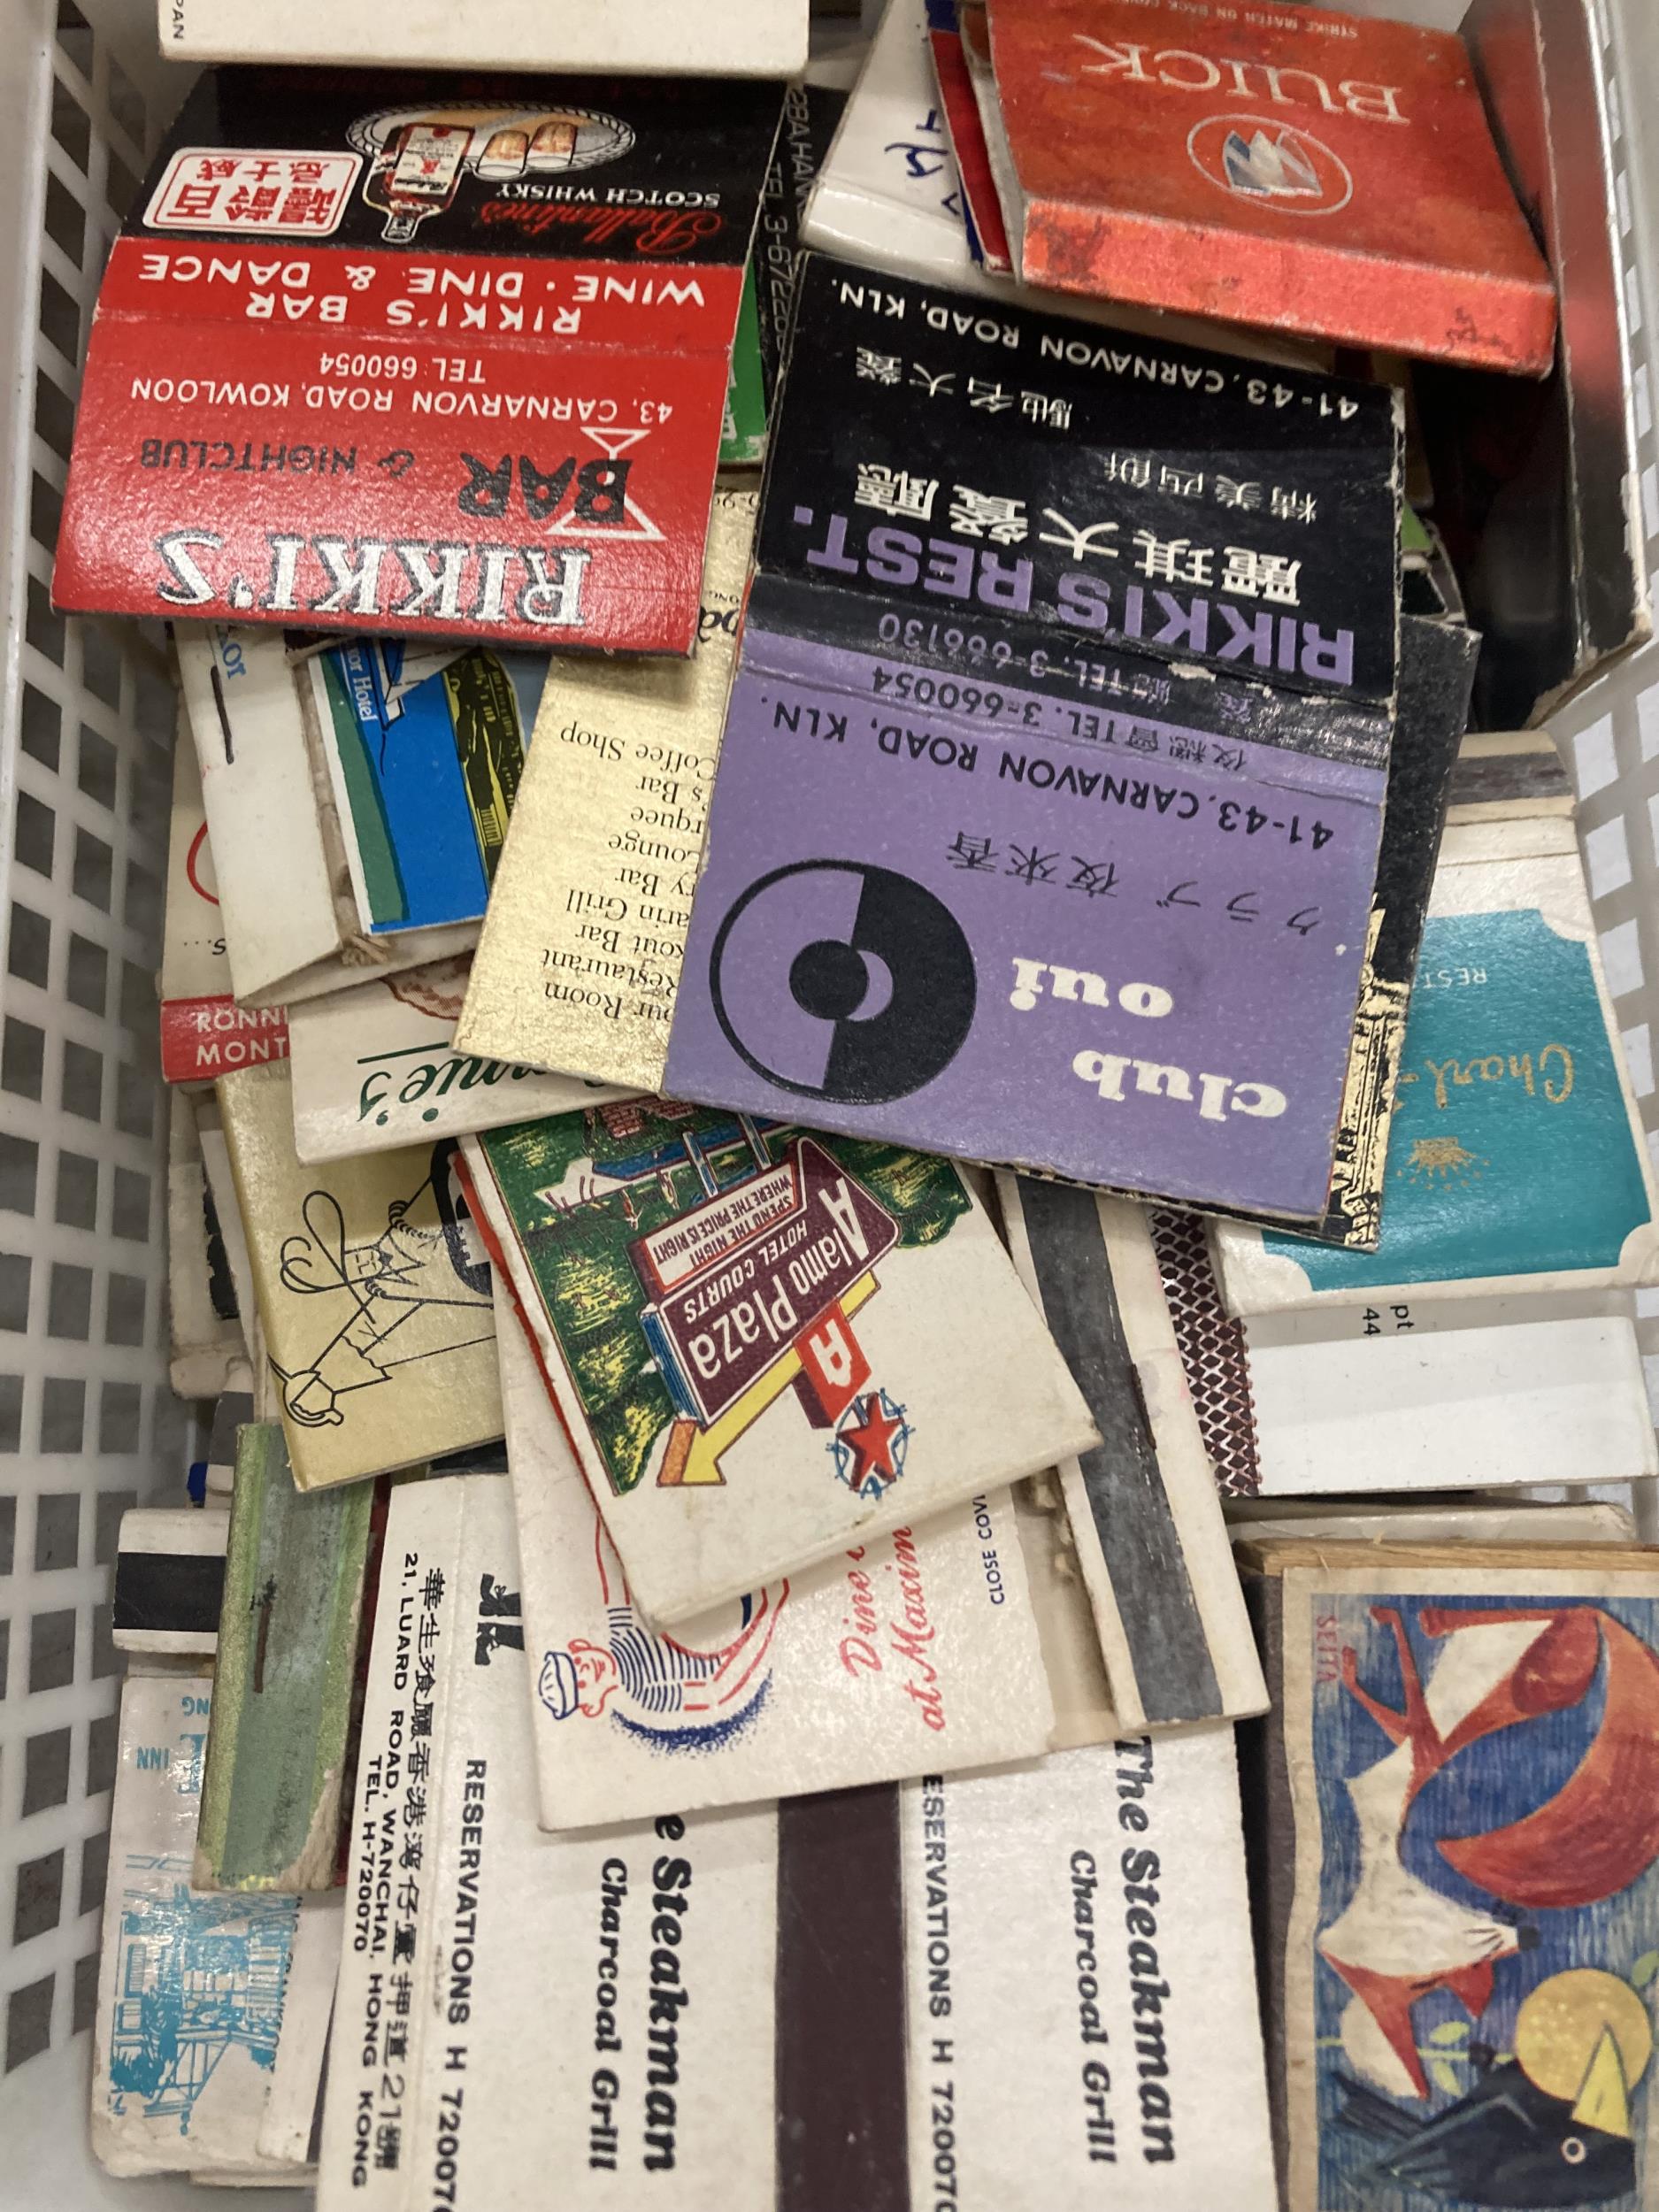 A LARGE QUANTITY OF VINTAGE MATCH BOOKS AND MATCH BOXES - Image 2 of 4